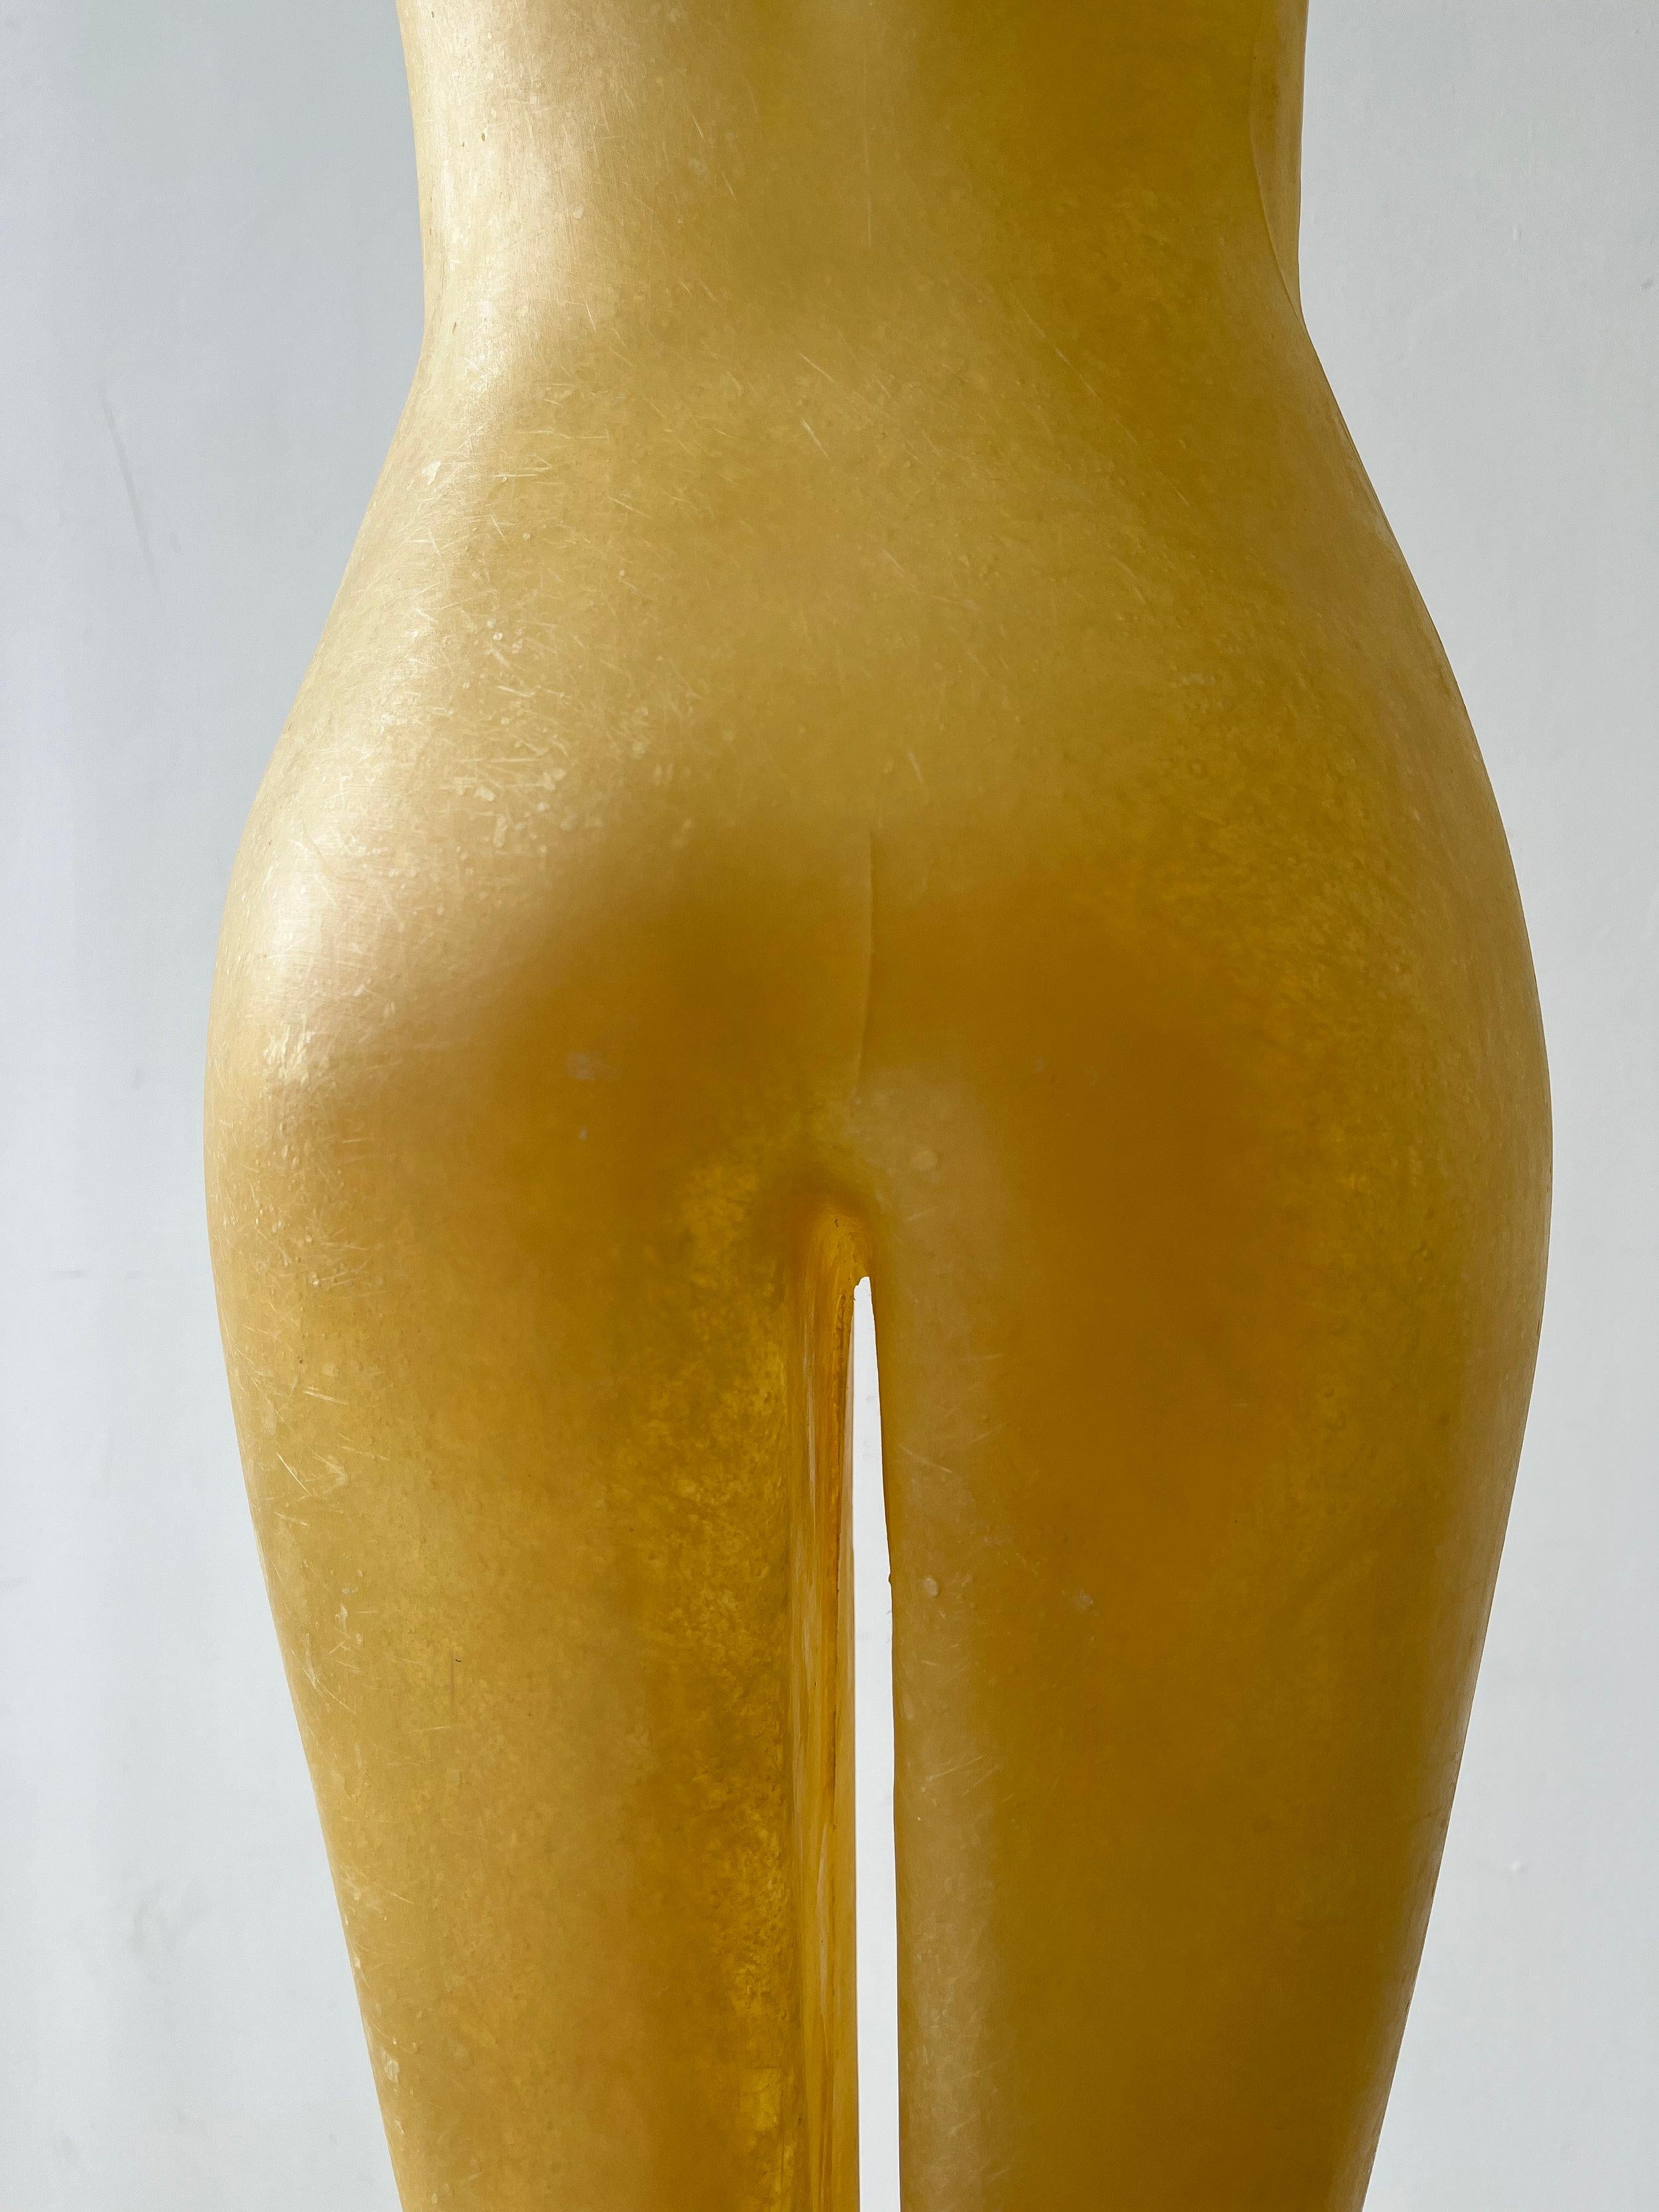 Vintage Exaggerated Molded Fiberglass Female Body Form on Fluted Base For Sale 9